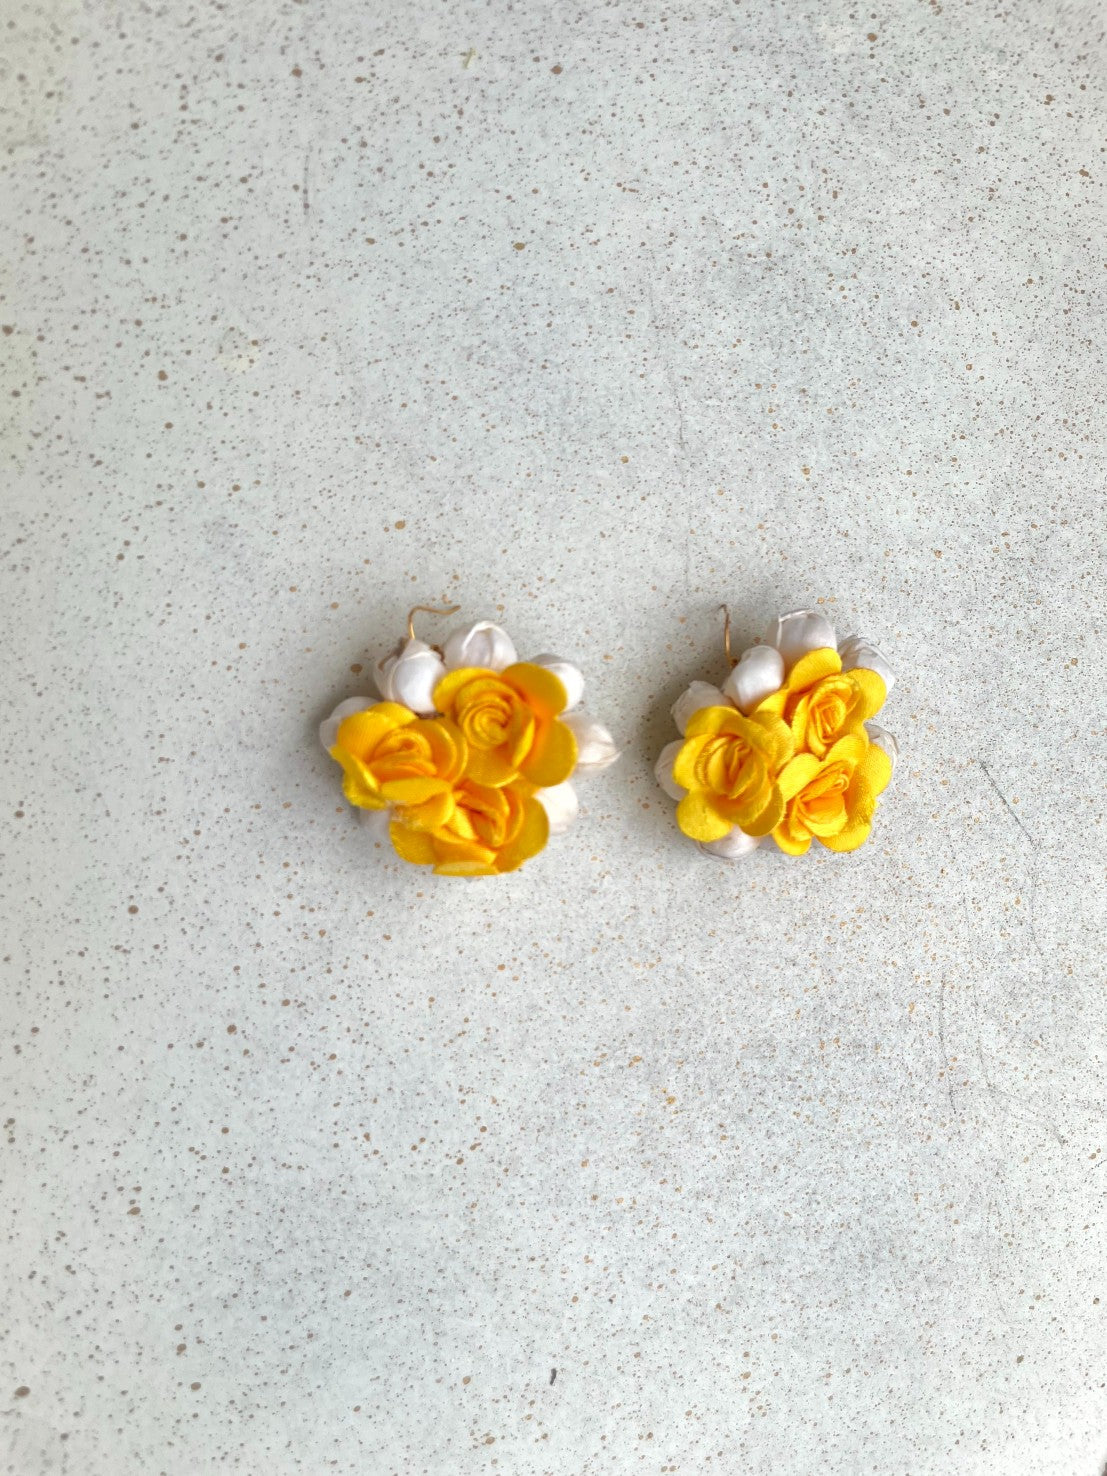 fcity.in - Trendy Stylish Yellow Flower Drop Earrings For Women And Western